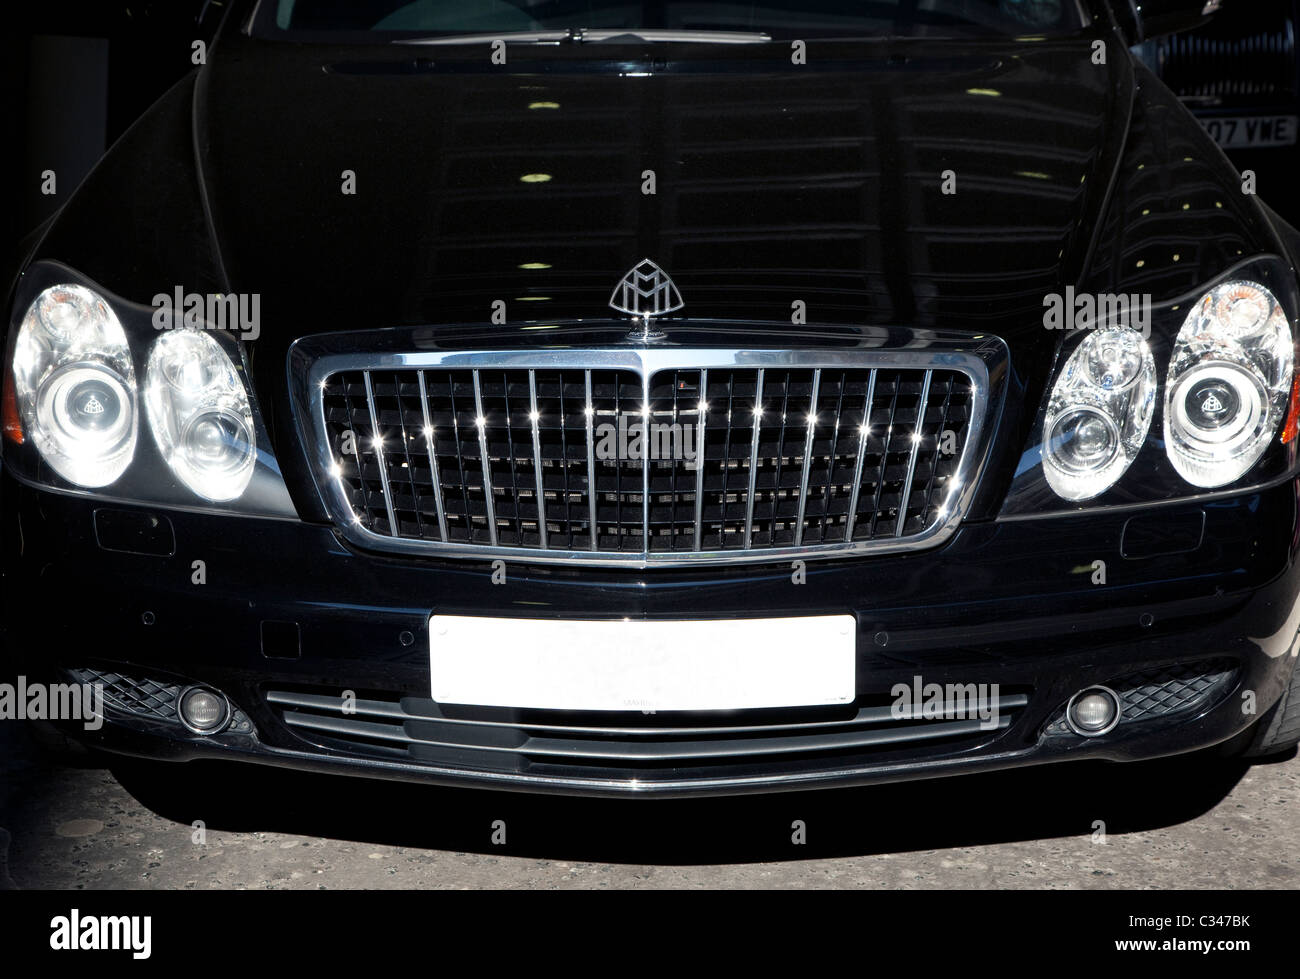 Maybach luxury saloon by Mercedes-Benz, London Stock Photo - Alamy